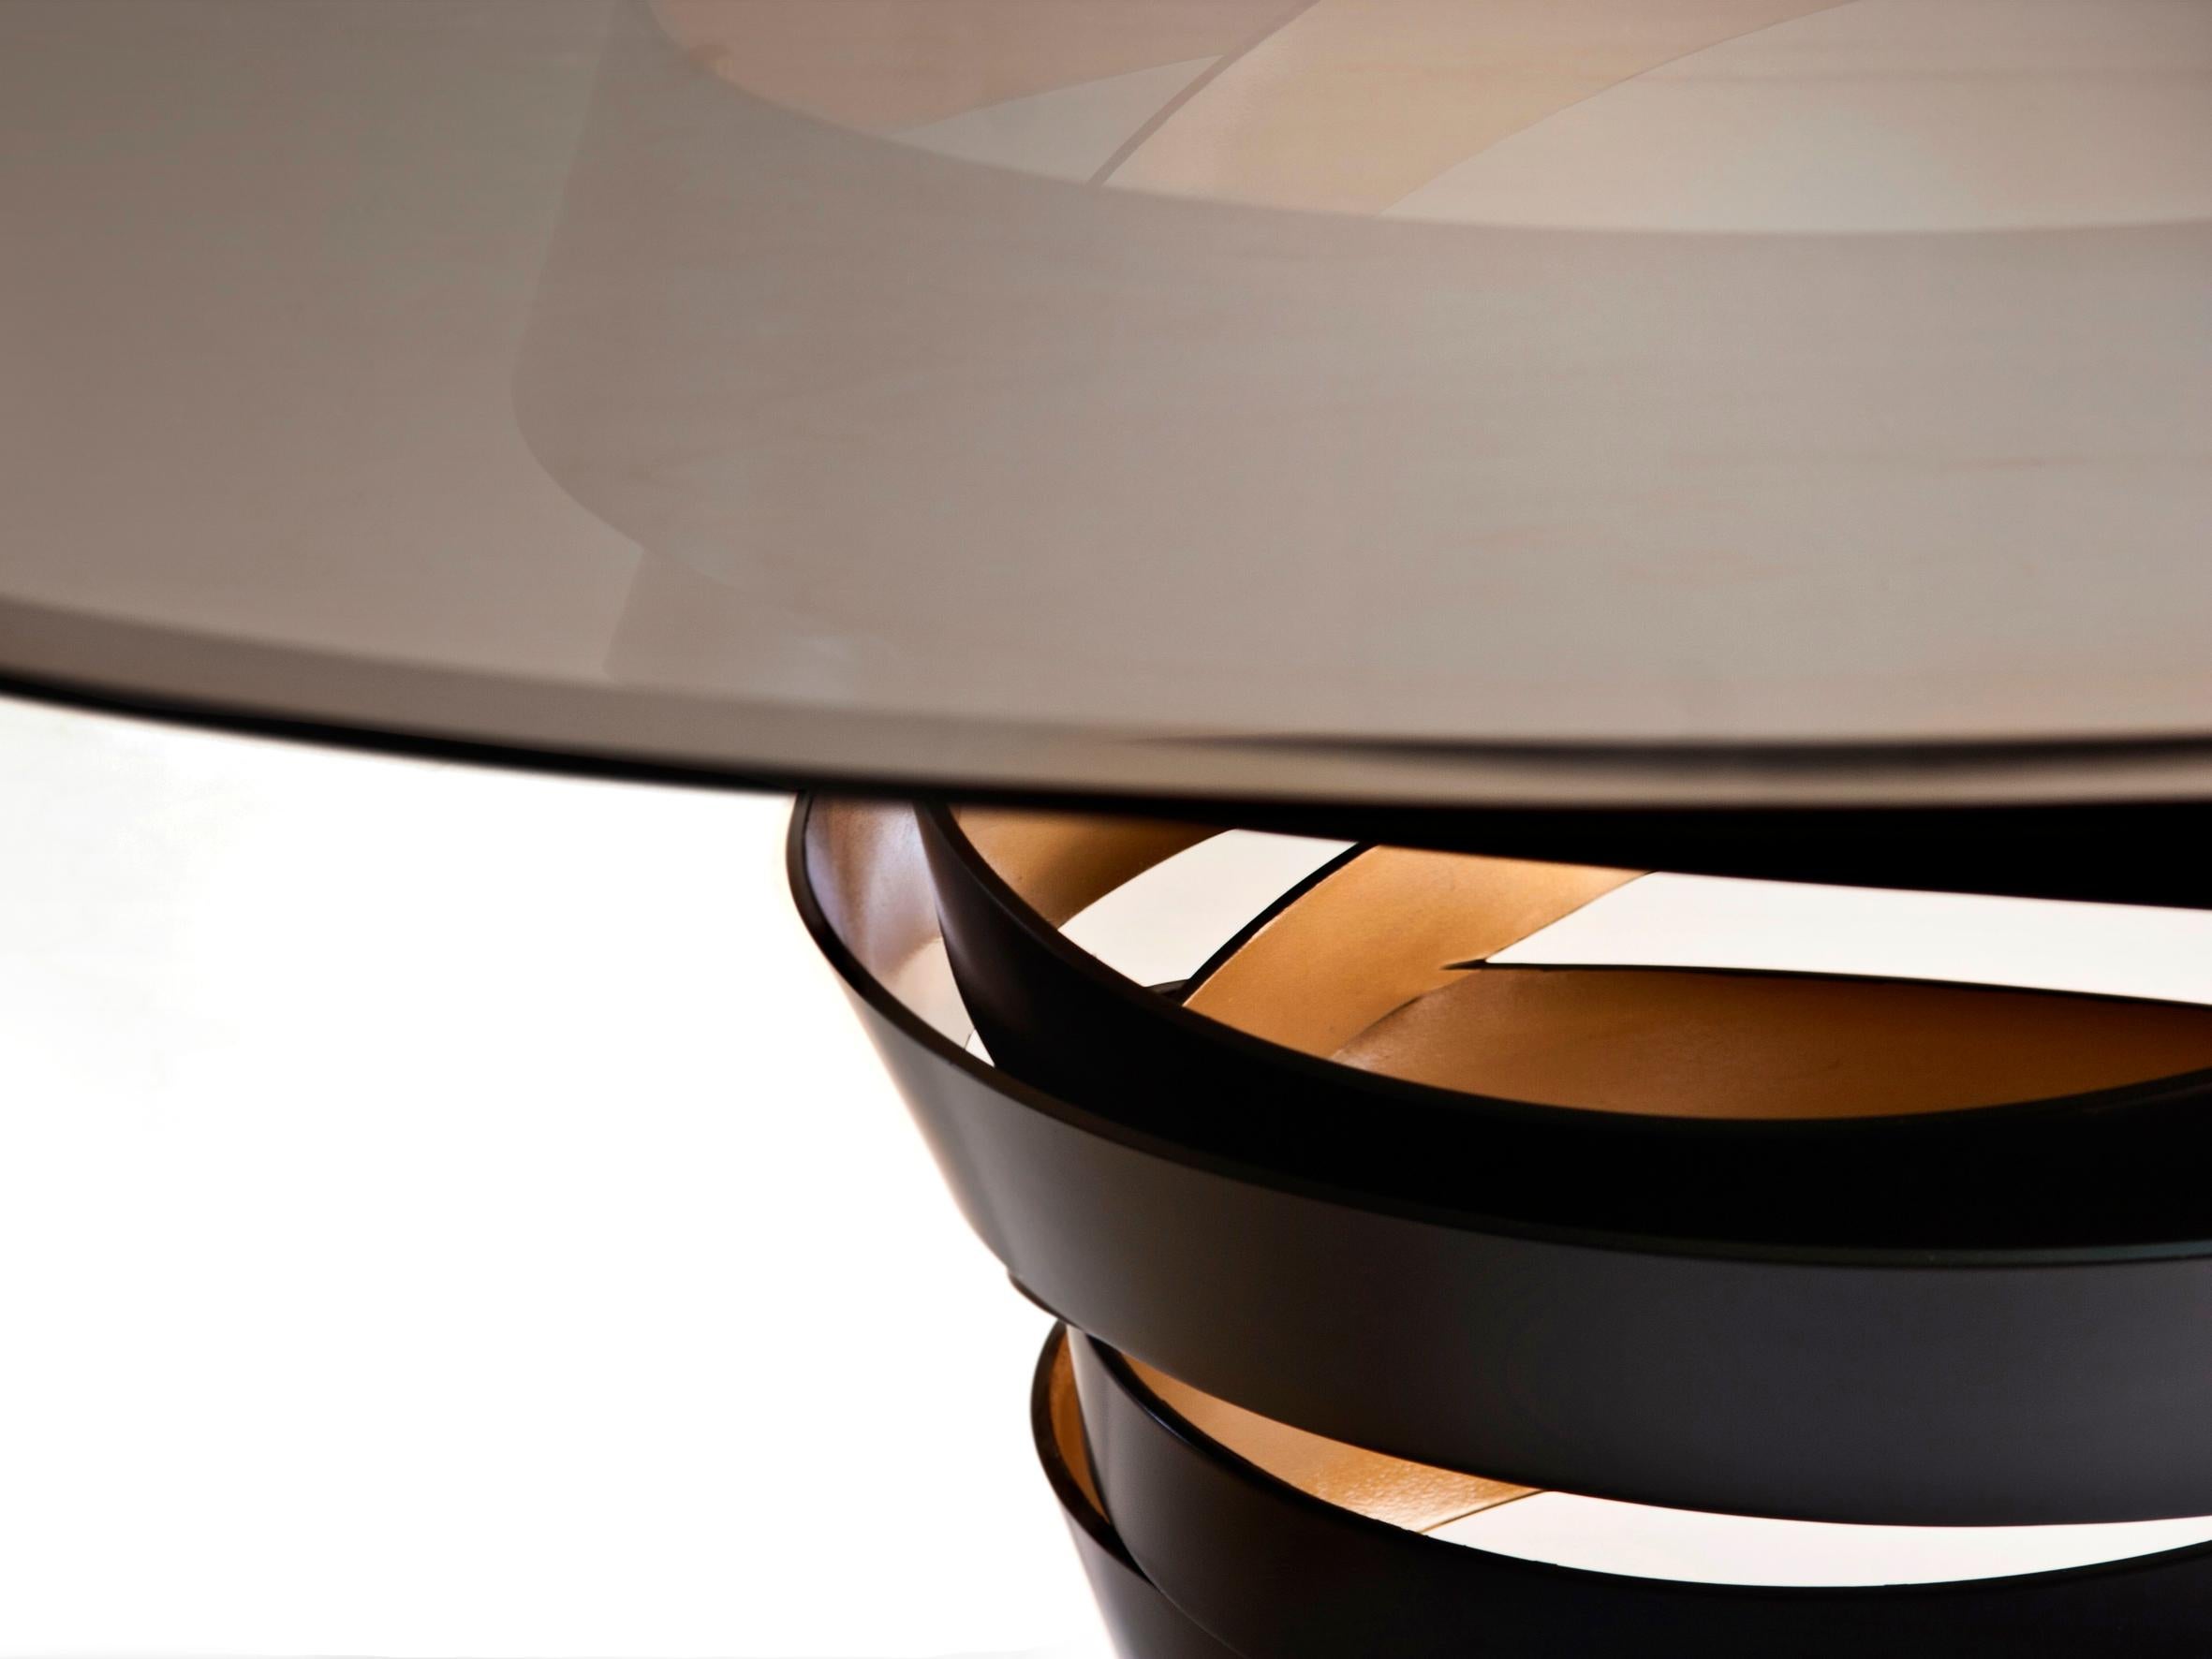 The swirling metal ribbon of the Intuition dining table evokes the mysterious and divine feminine instinct. Carefree and unexpected swirls are guided by emotions and desires. The two-tone metal base is topped with a perfect glass circle top. Without